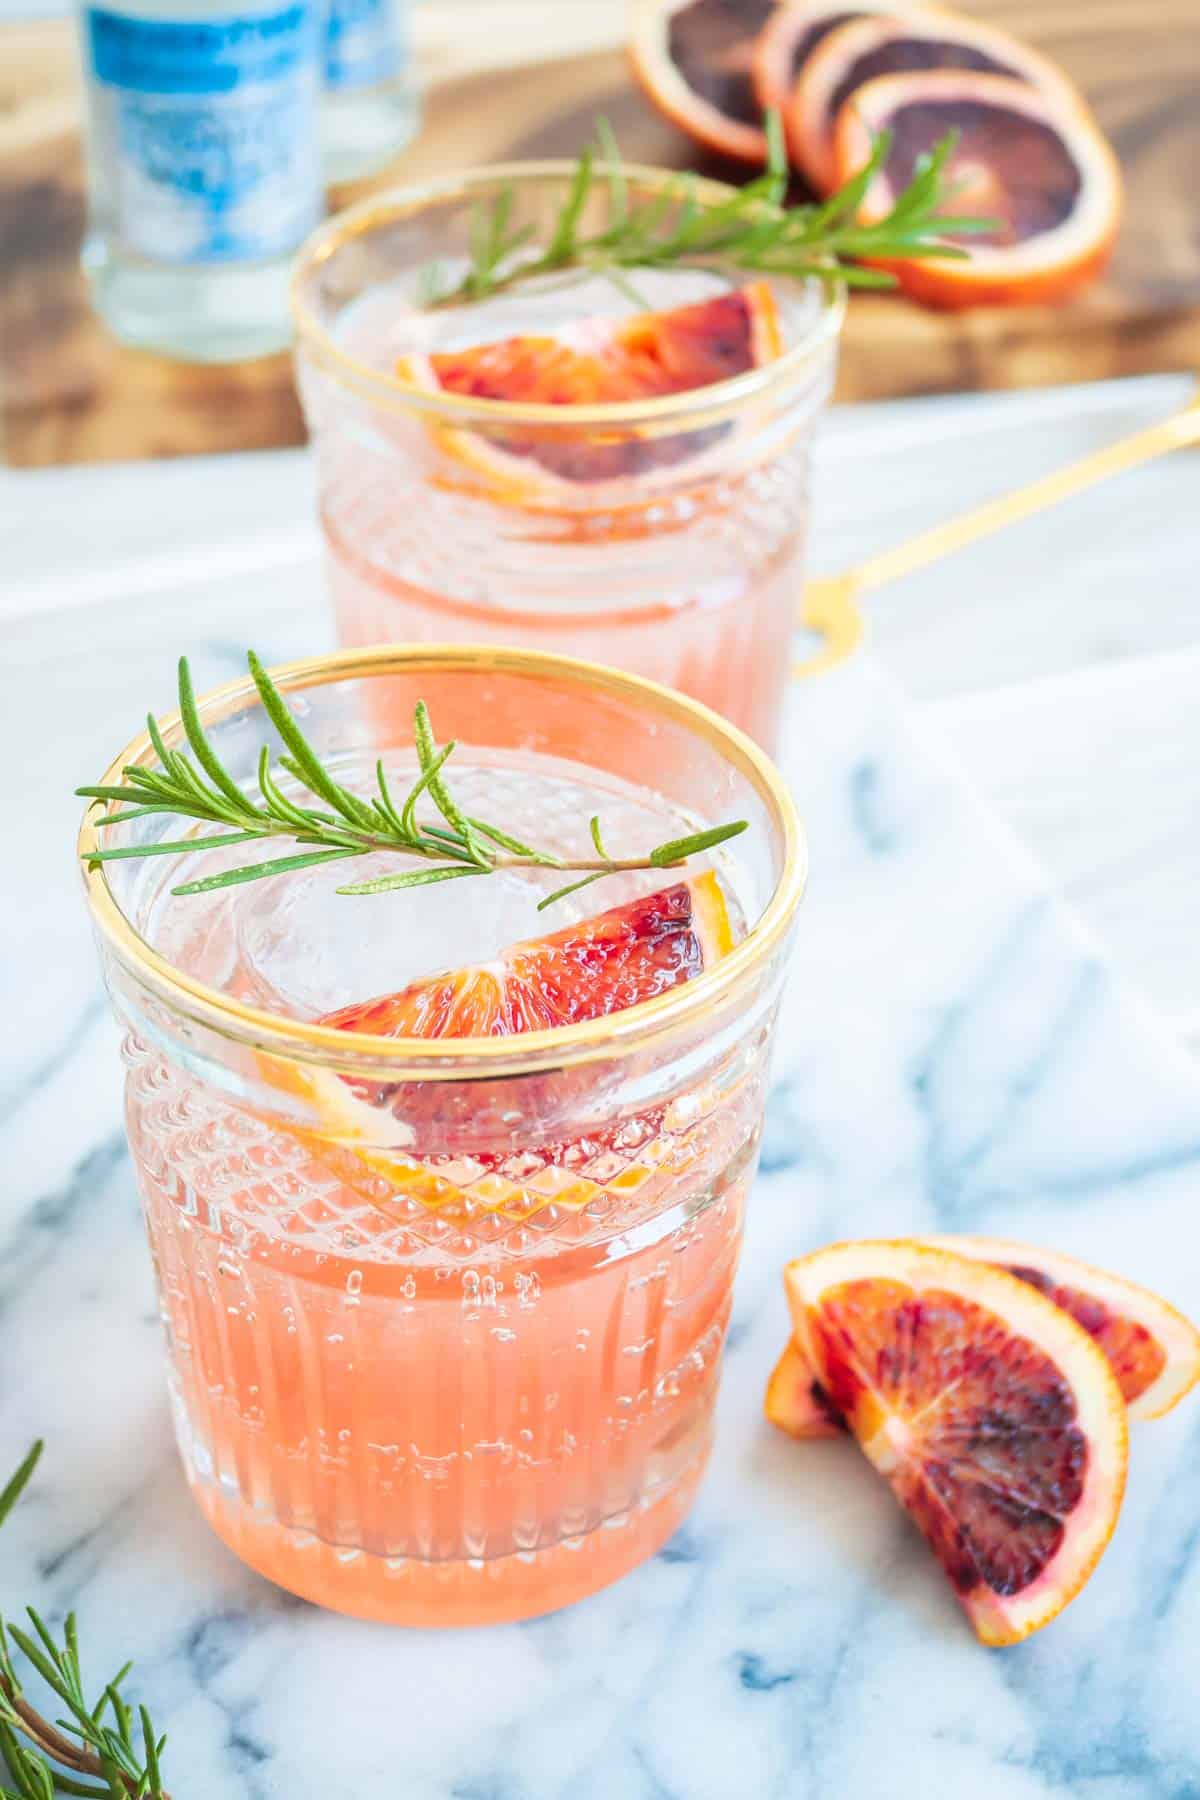 two blood orange rosemary cocktails garnished with sprigs of rosemary and wedges of blood orange next to more wedges of a blood orange.